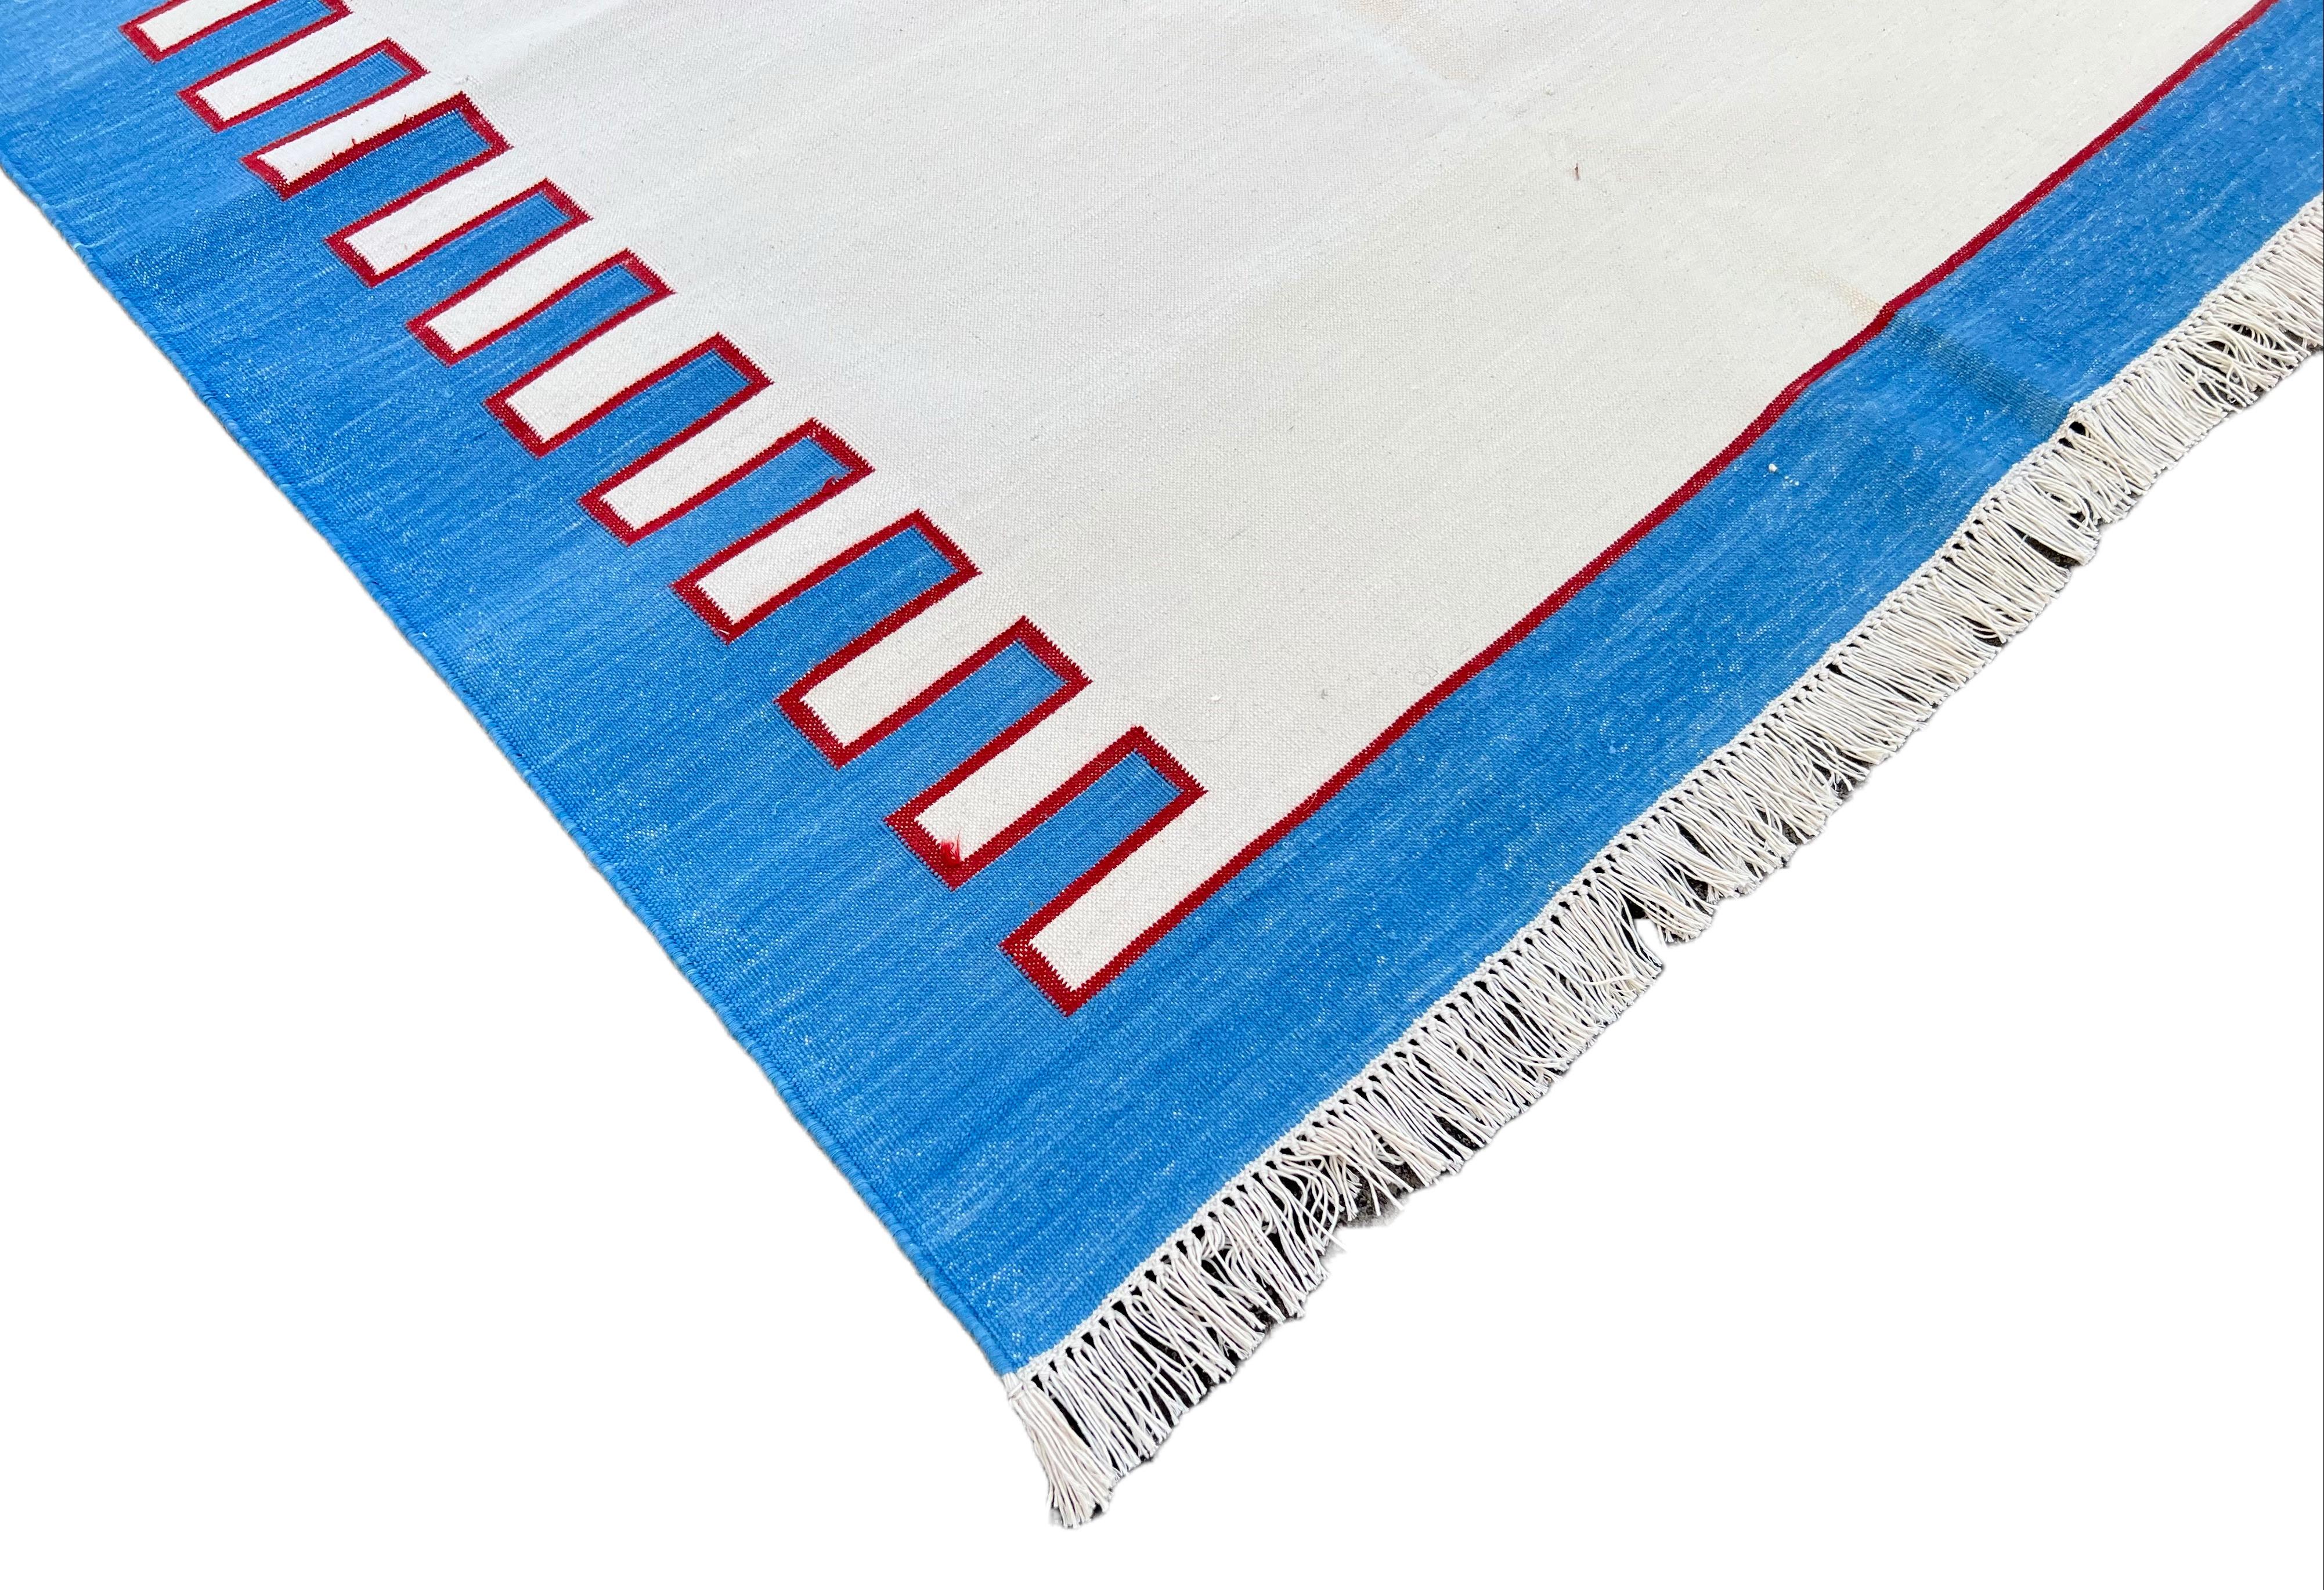 Cotton Natural Vegetable Dyed, Cream, Red & Blue Zig Zag Striped Indian Rug - 8'x10'
These special flat-weave dhurries are hand-woven with 15 ply 100% cotton yarn. Due to the special manufacturing techniques used to create our rugs, the size and